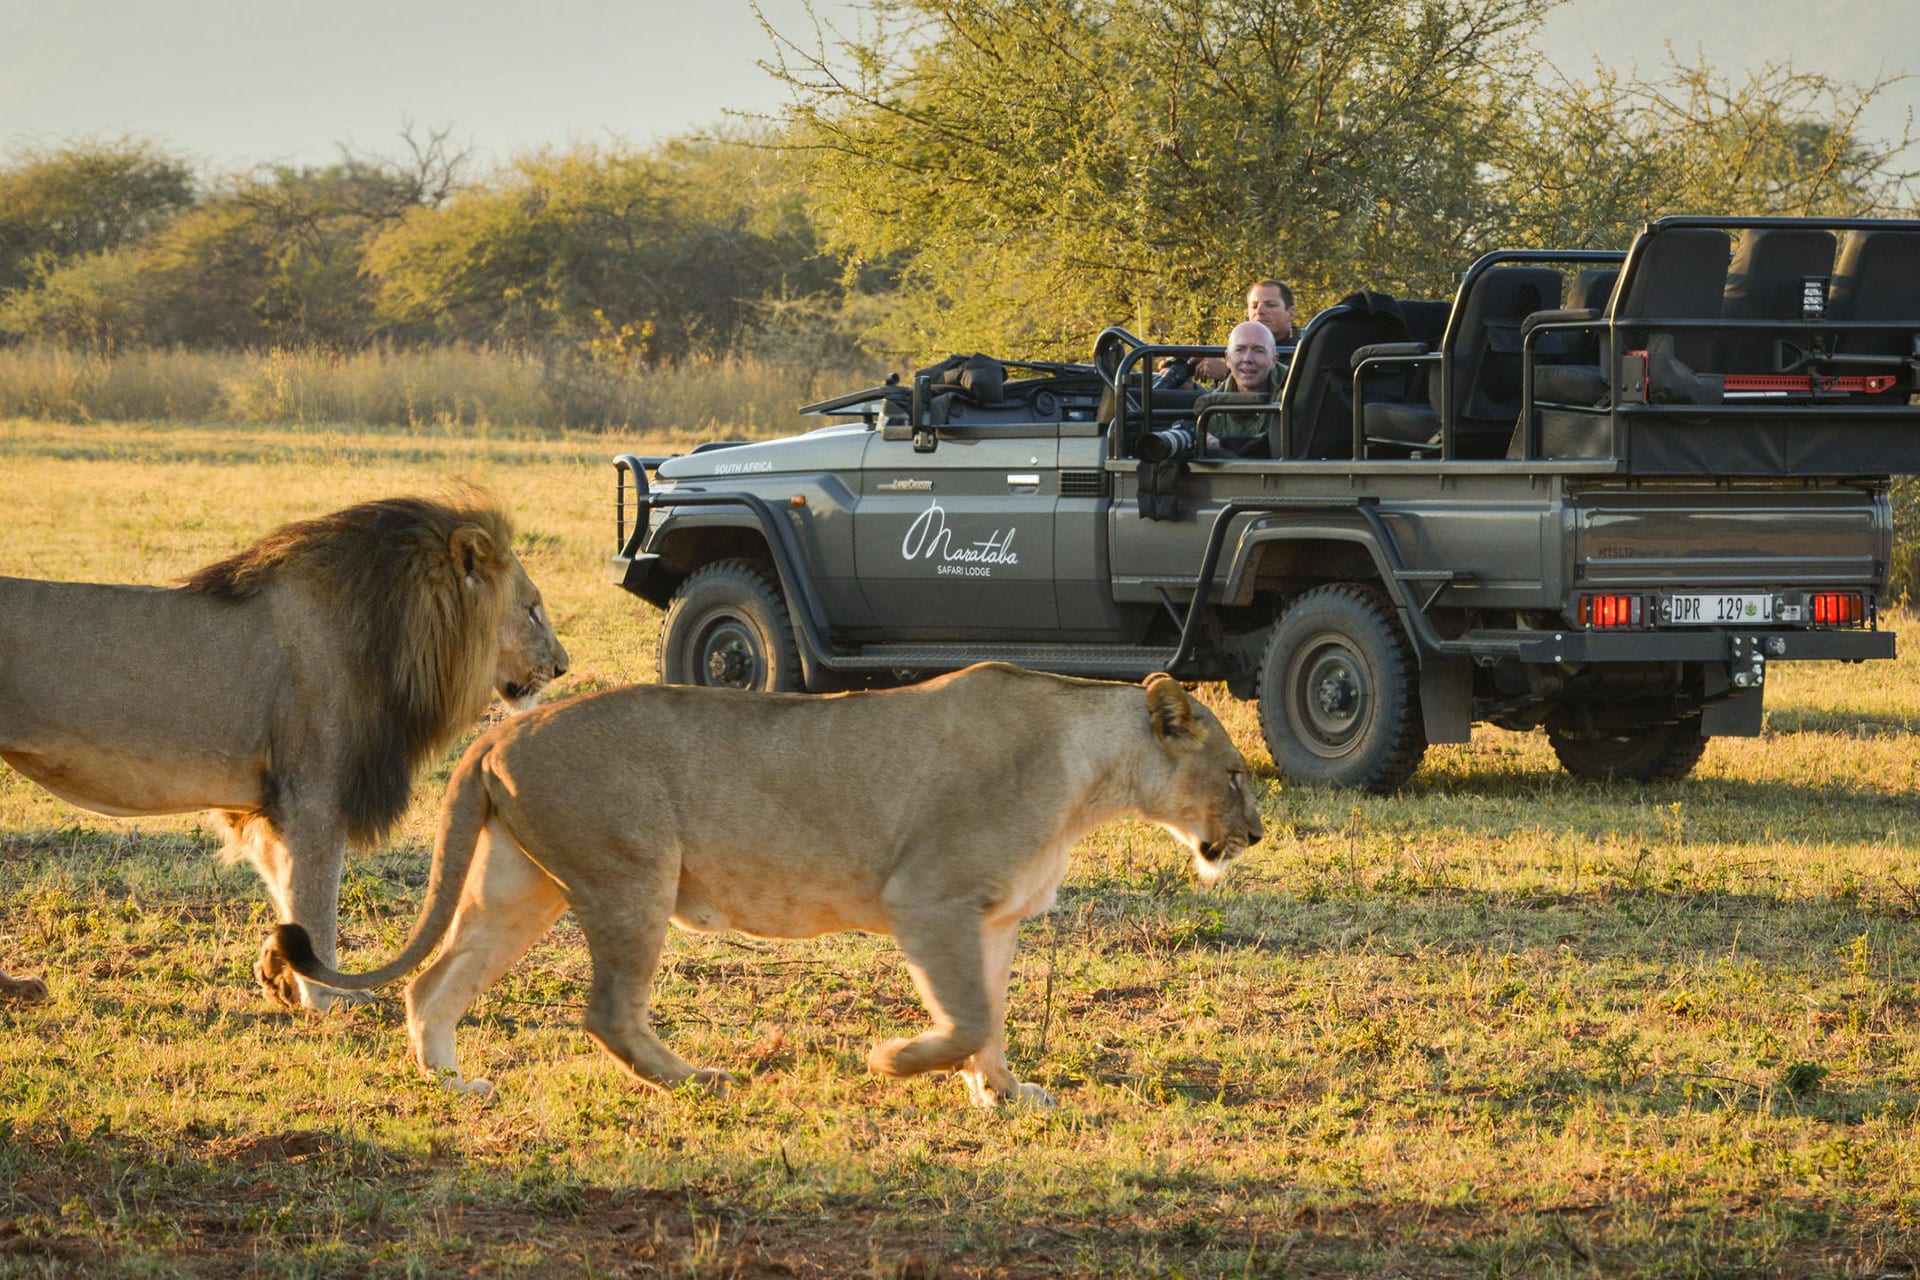 Lions at Marataba, one of the lodge's in the MORE group that has sustainable travel